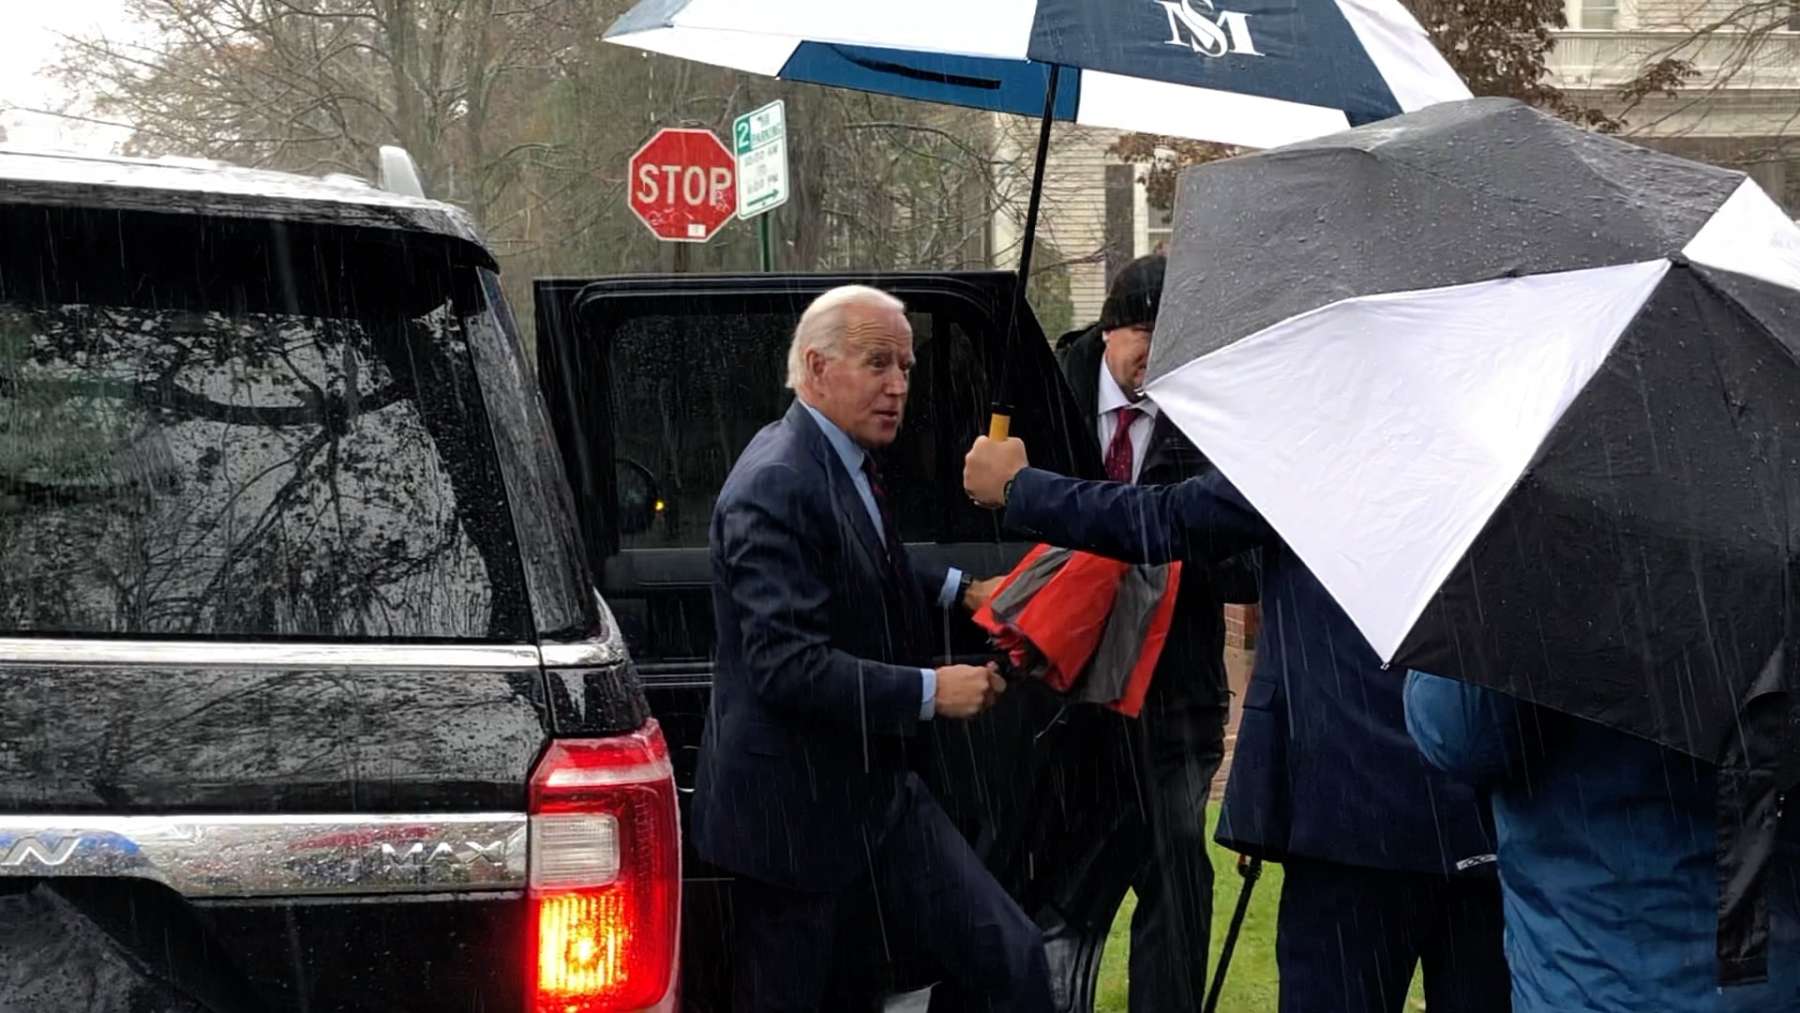 Joe Biden confronted by climate activist outside fundraiser on East Side of Providence